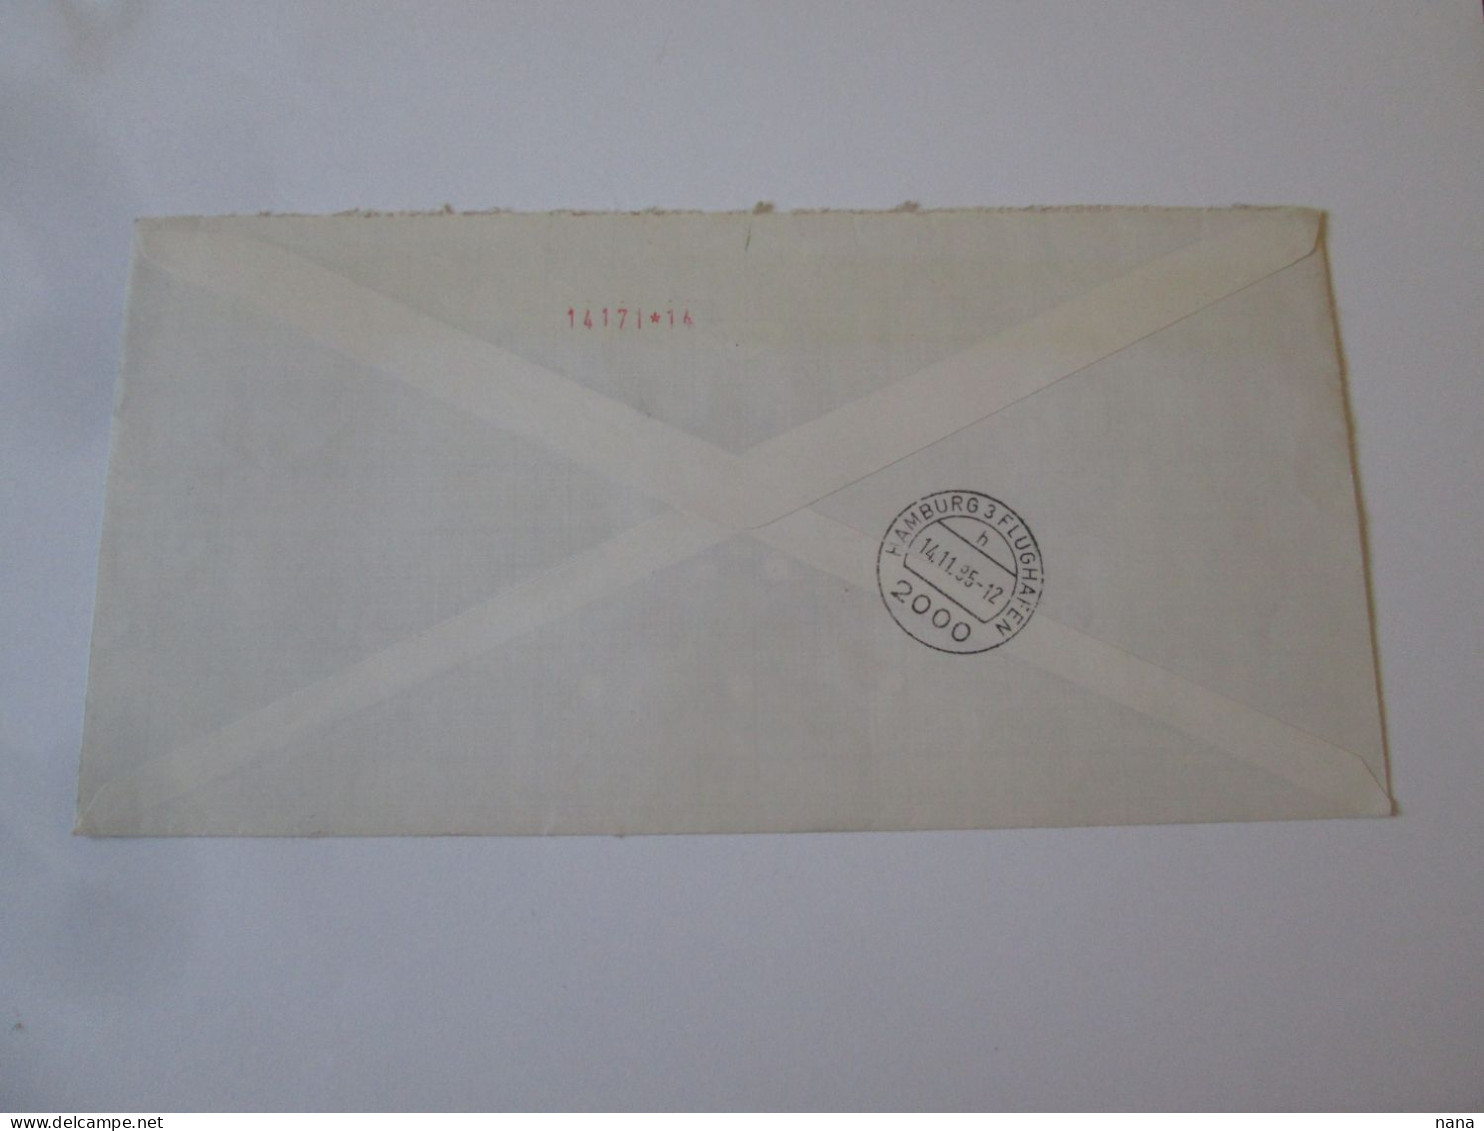 Islande/Iceland Enveloppe Recomandee Expres 1985/Registered Cover Expres 1985 - Covers & Documents